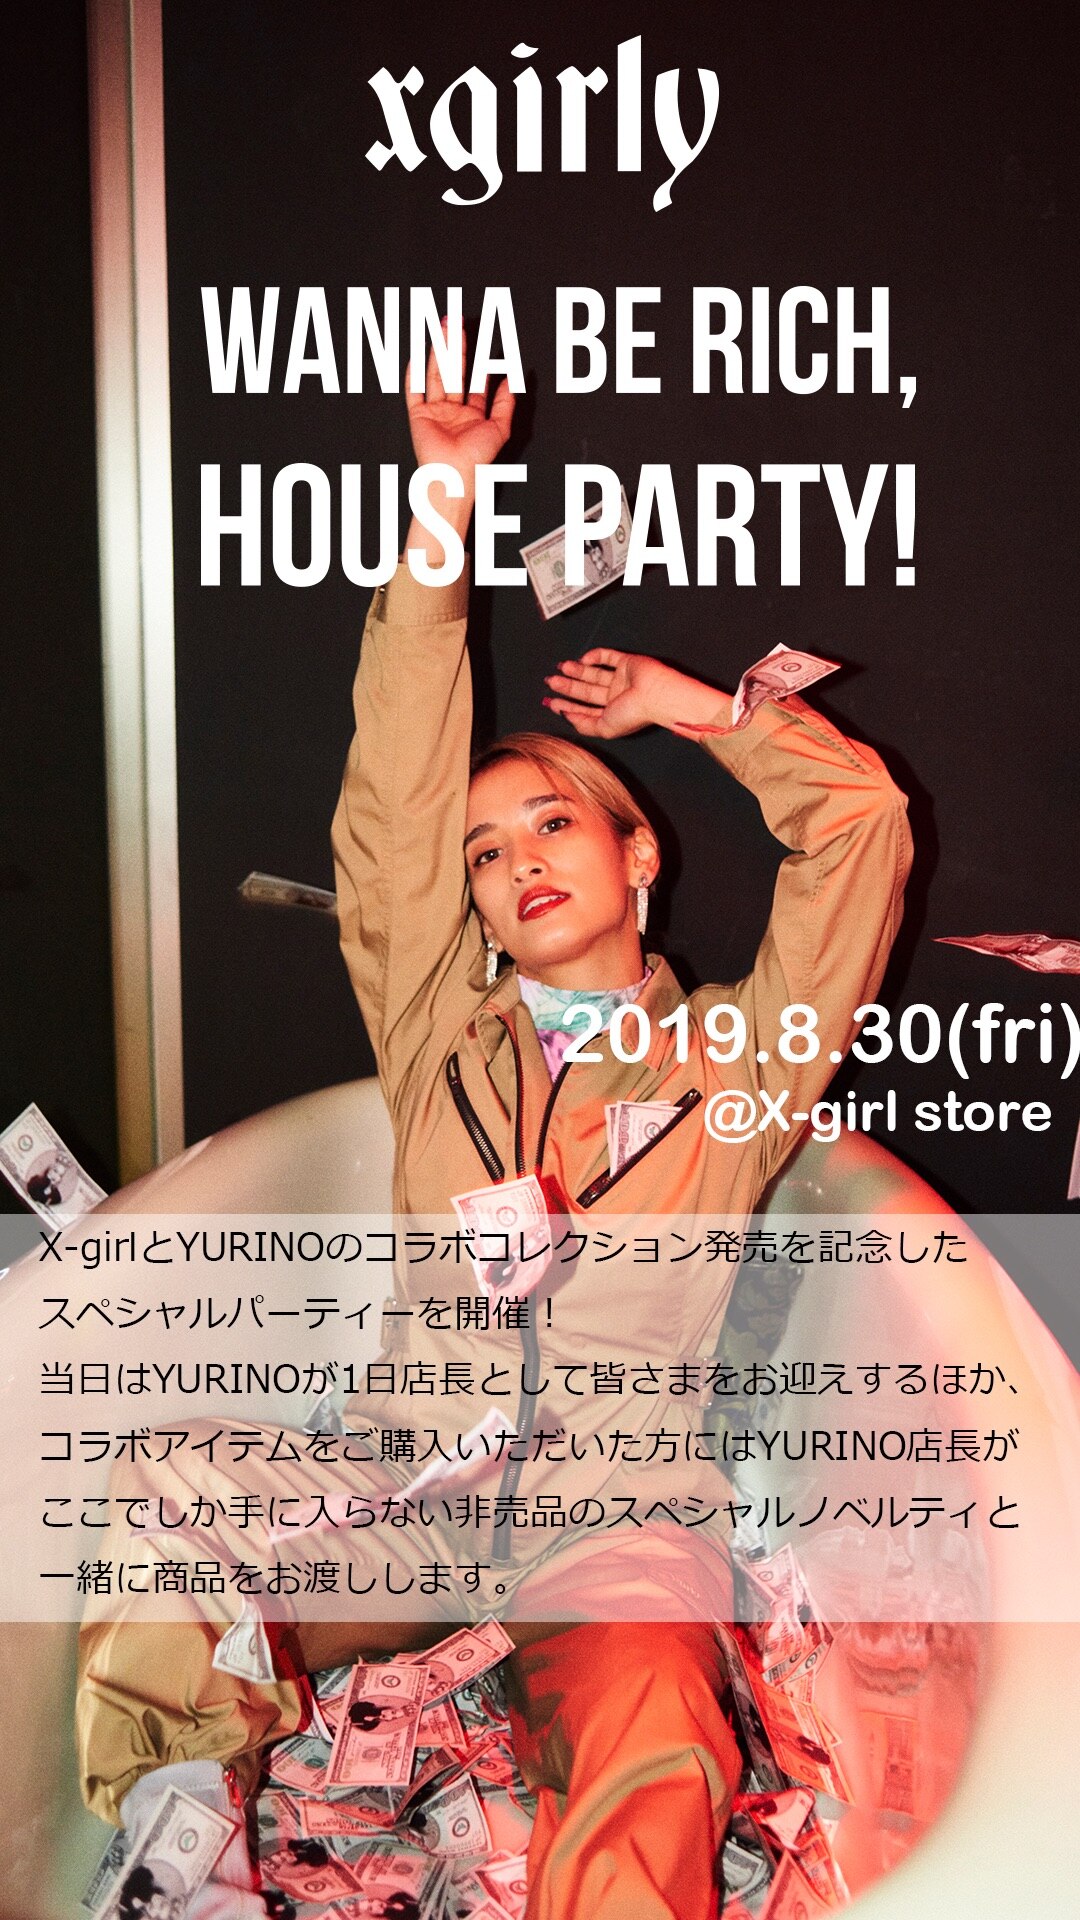 NEWS [X-girl×YURINO “WANNA BE RICH” HOUSE PARTY]｜Happiness(ハピネス